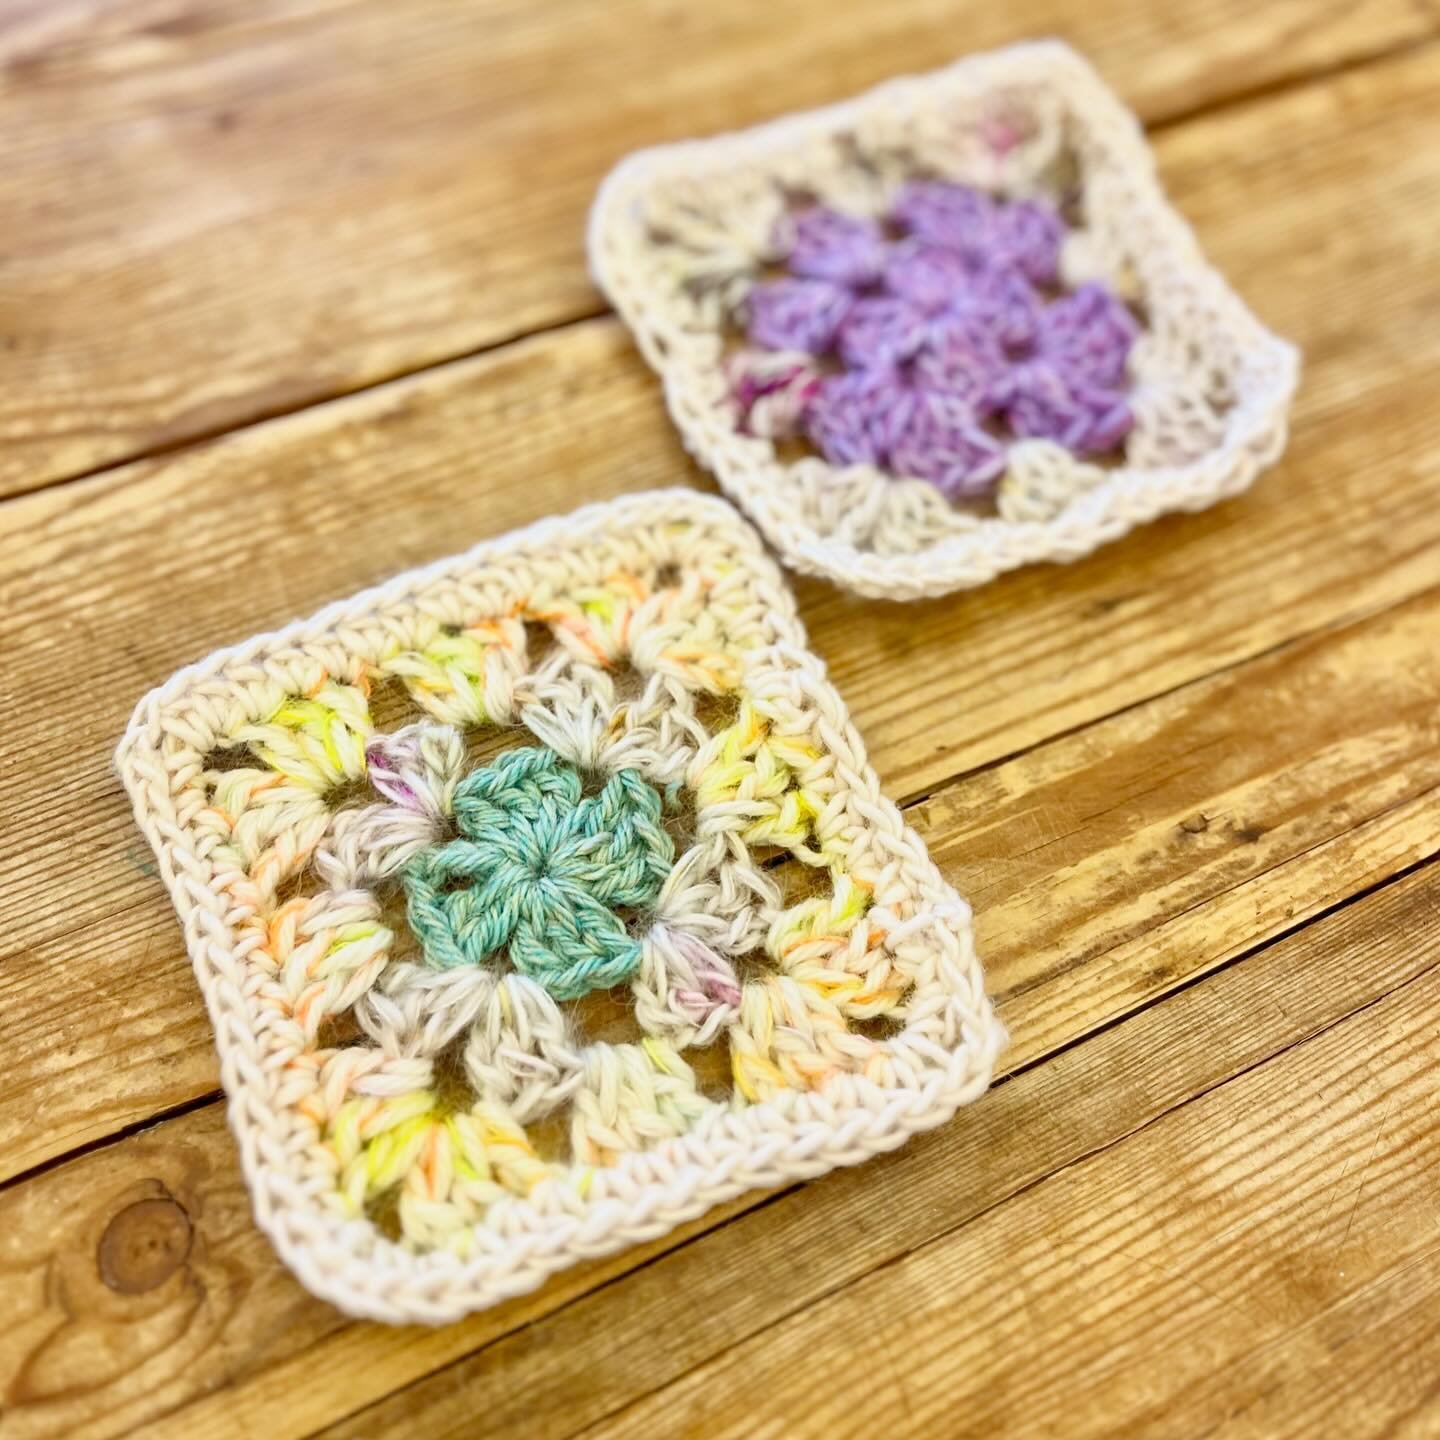 You can do so much with a collection of granny squares! Make a bag, a sweater, a blanket, a coffee sleeve, a headband, a dog sweater&hellip; but first you have to learn how to make them! Sign up for our upcoming class, and give it a try.